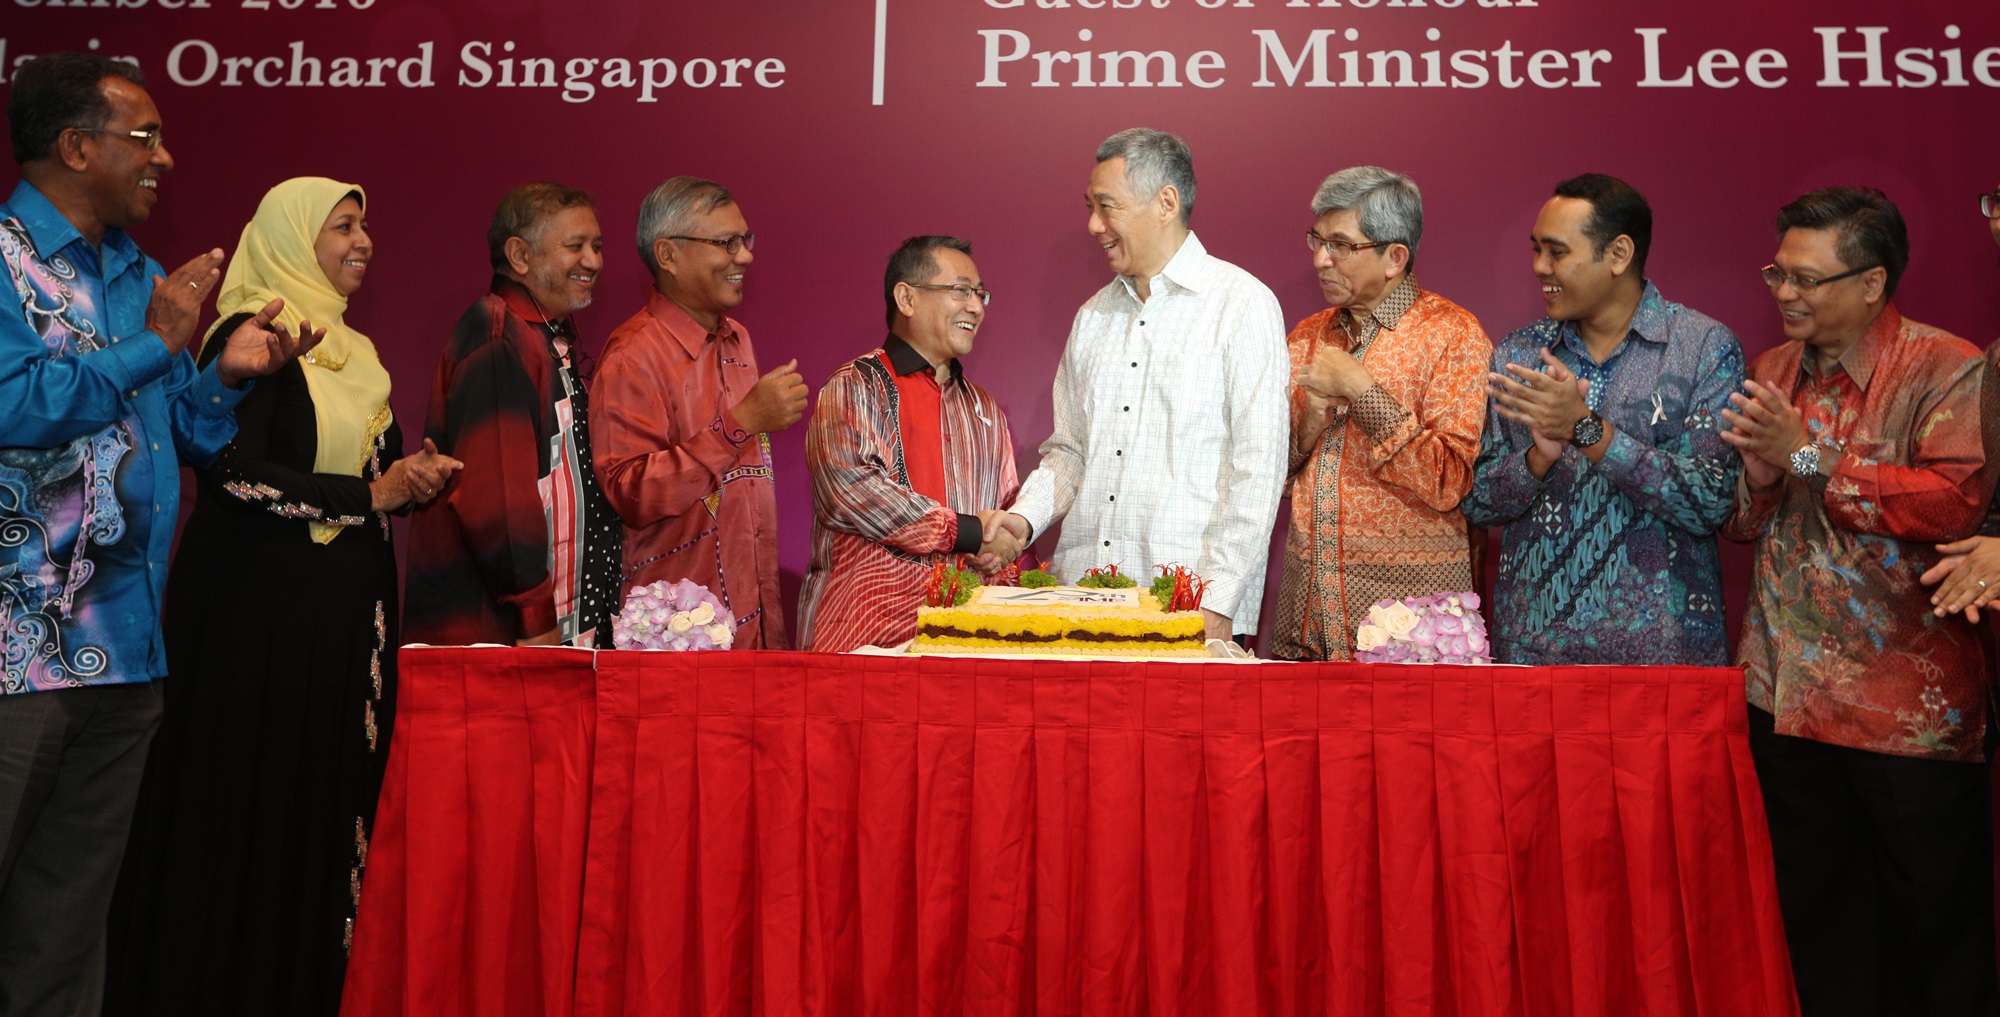 PM Lee Hsien Loong at the Association of Muslim Professionals (AMP) 25th Anniversary Charity Dinner